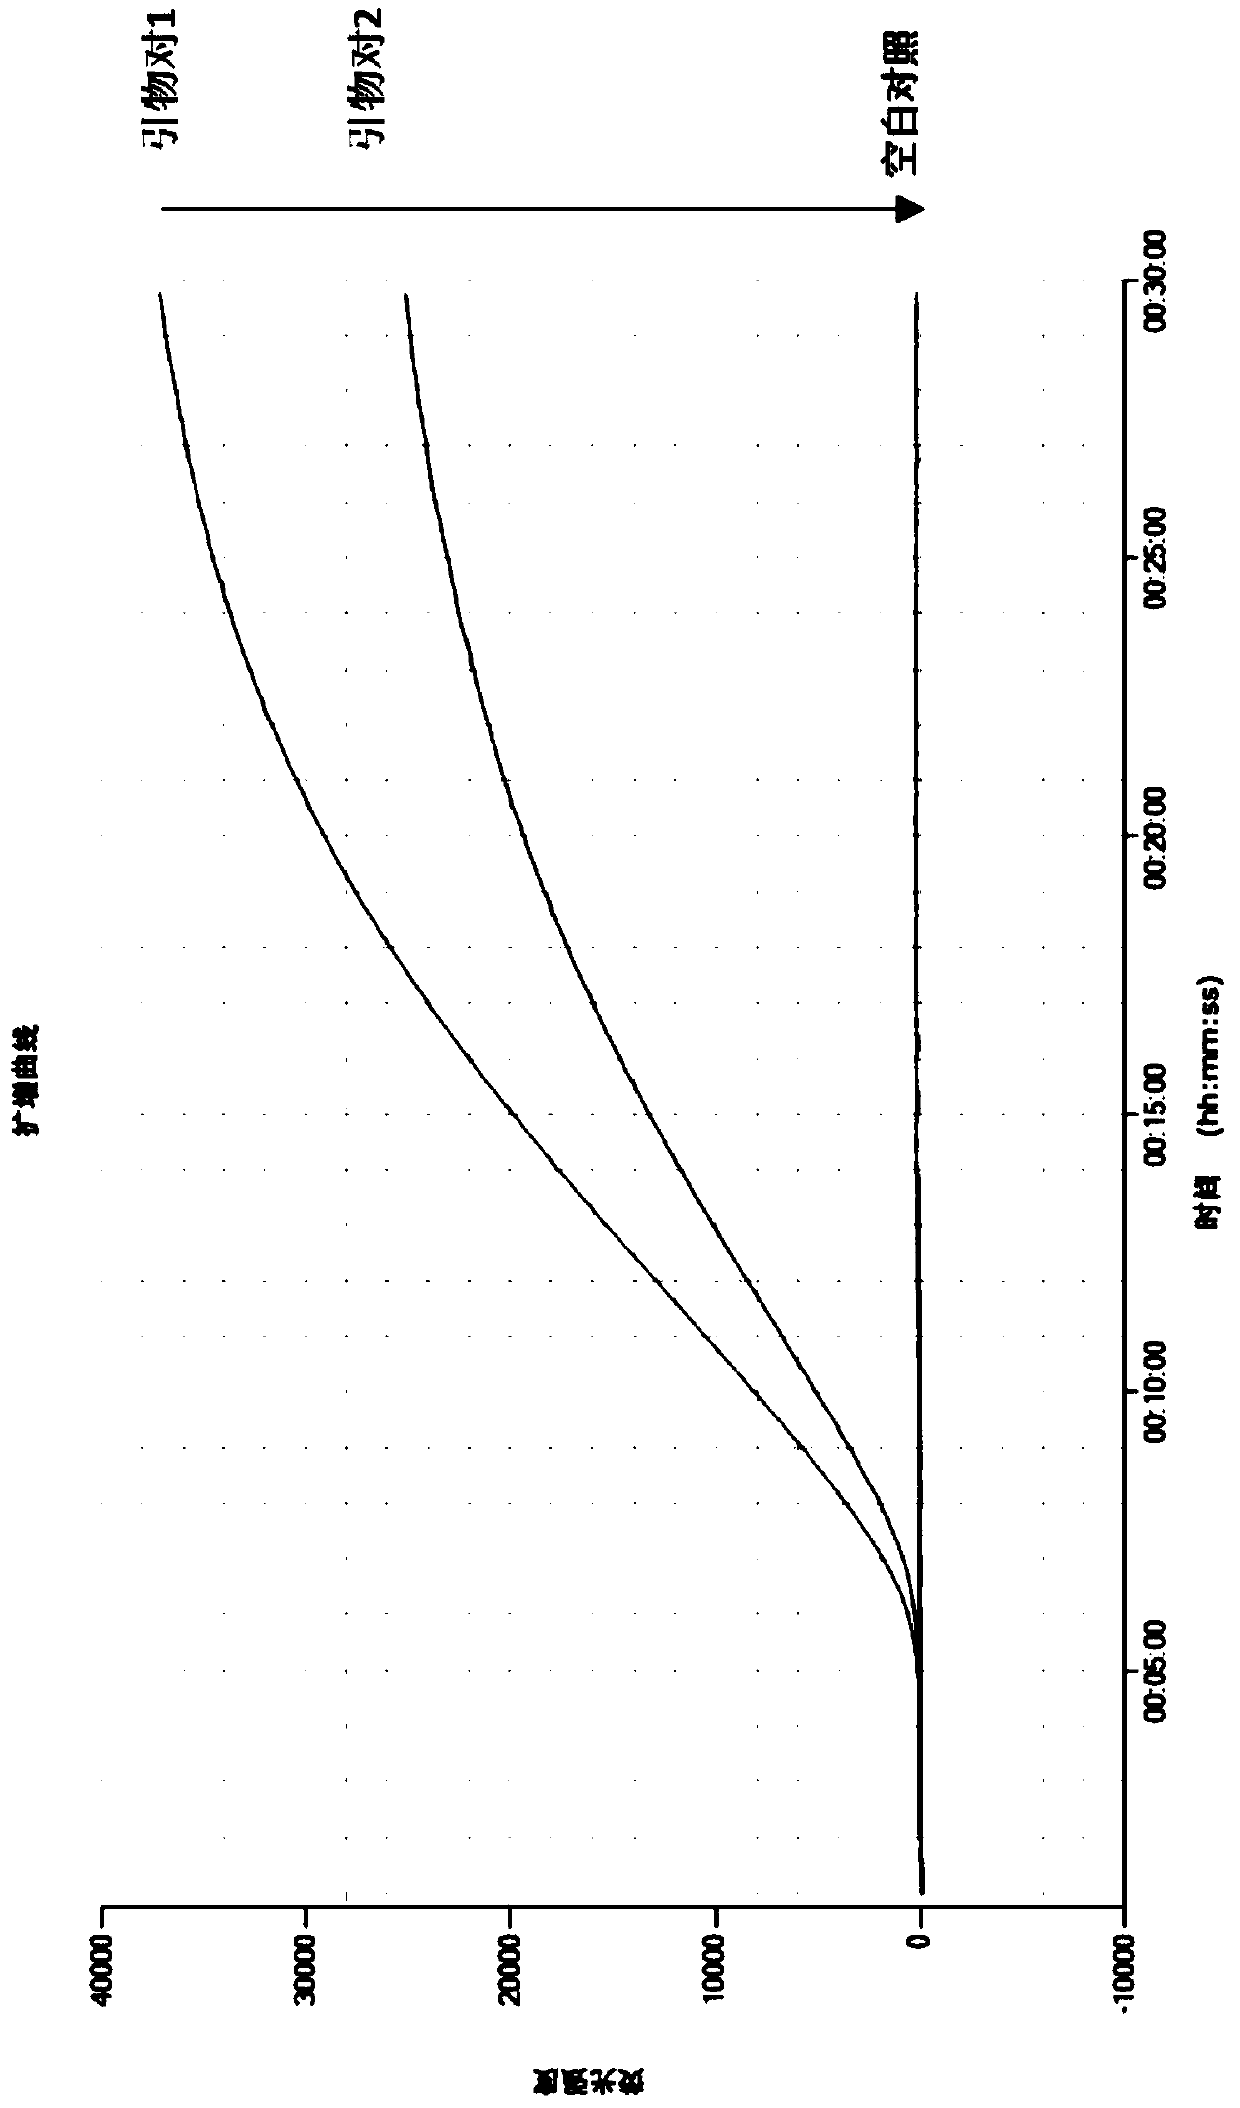 Kit, RPA primer pair, probe and method for detecting CPV nucleic acid